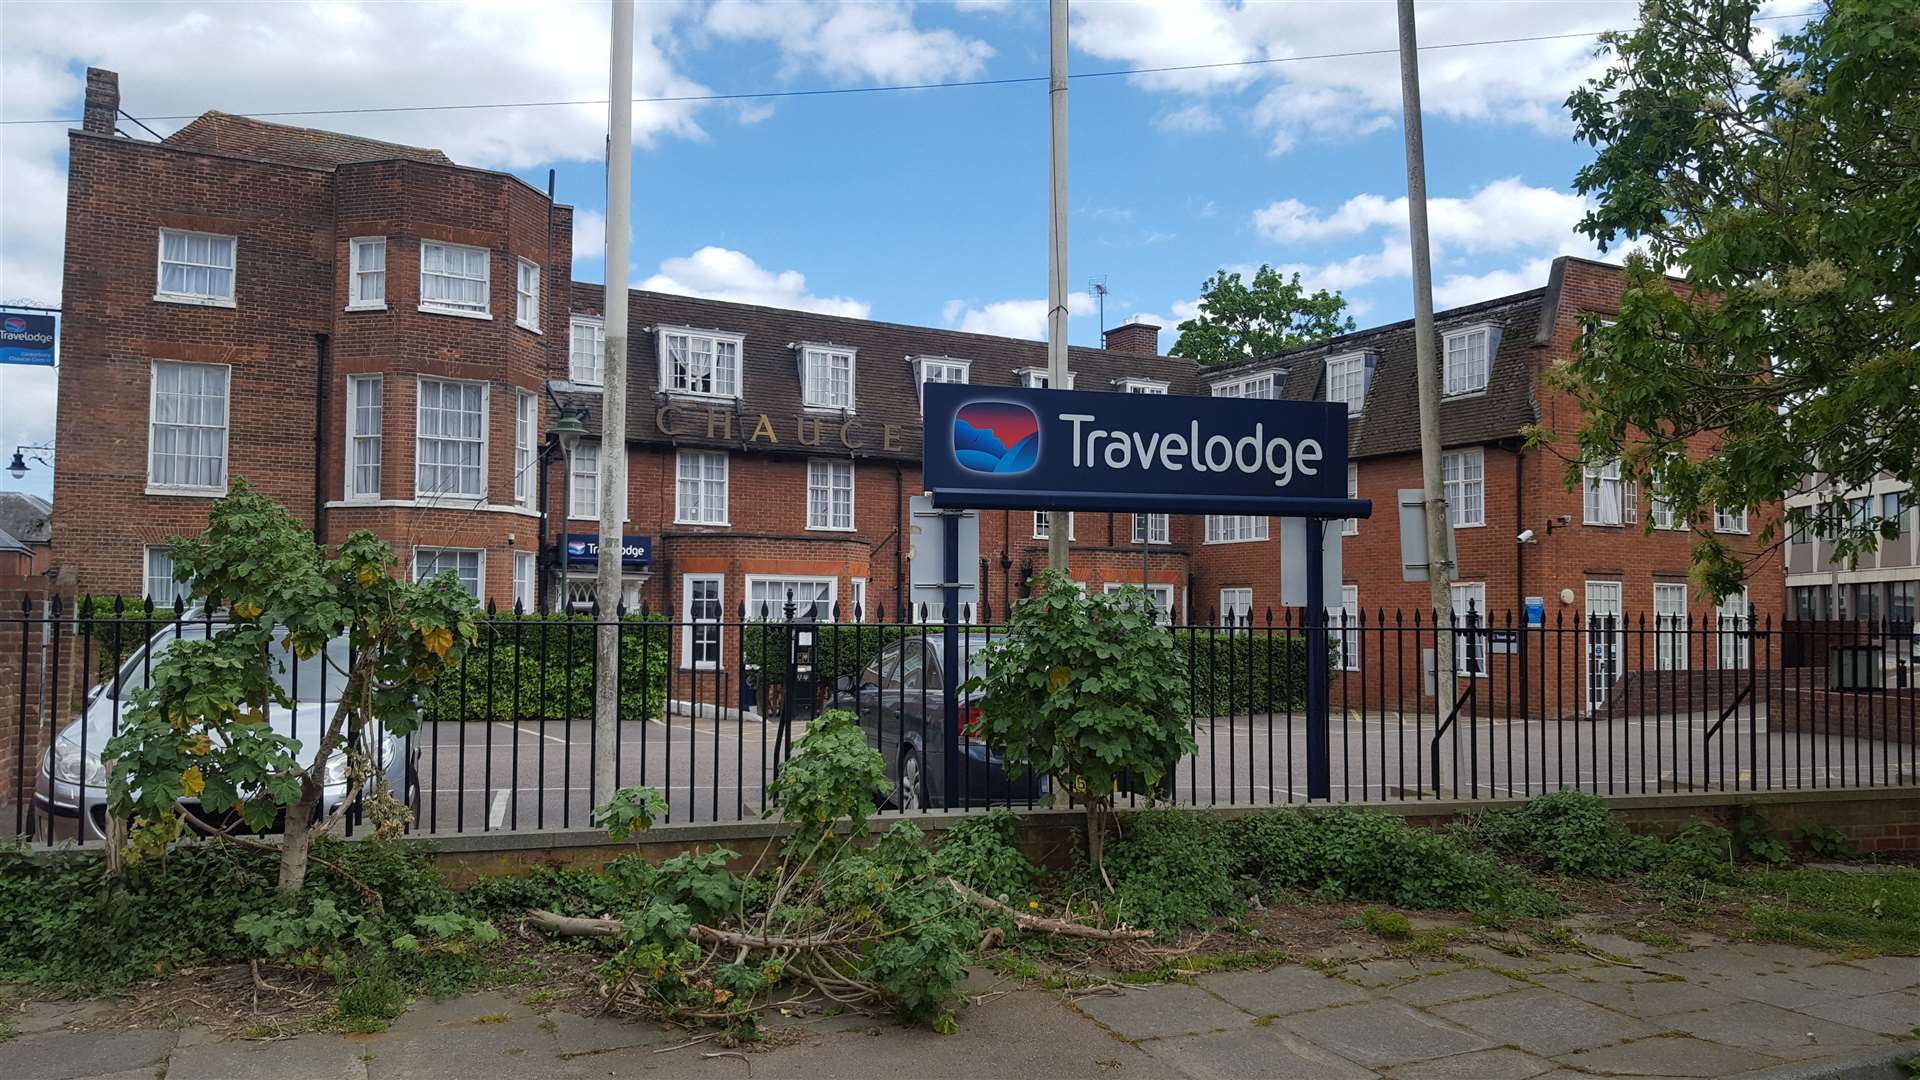 The Travelodge in Ivy Lane was used to house the homeless during the pandemic